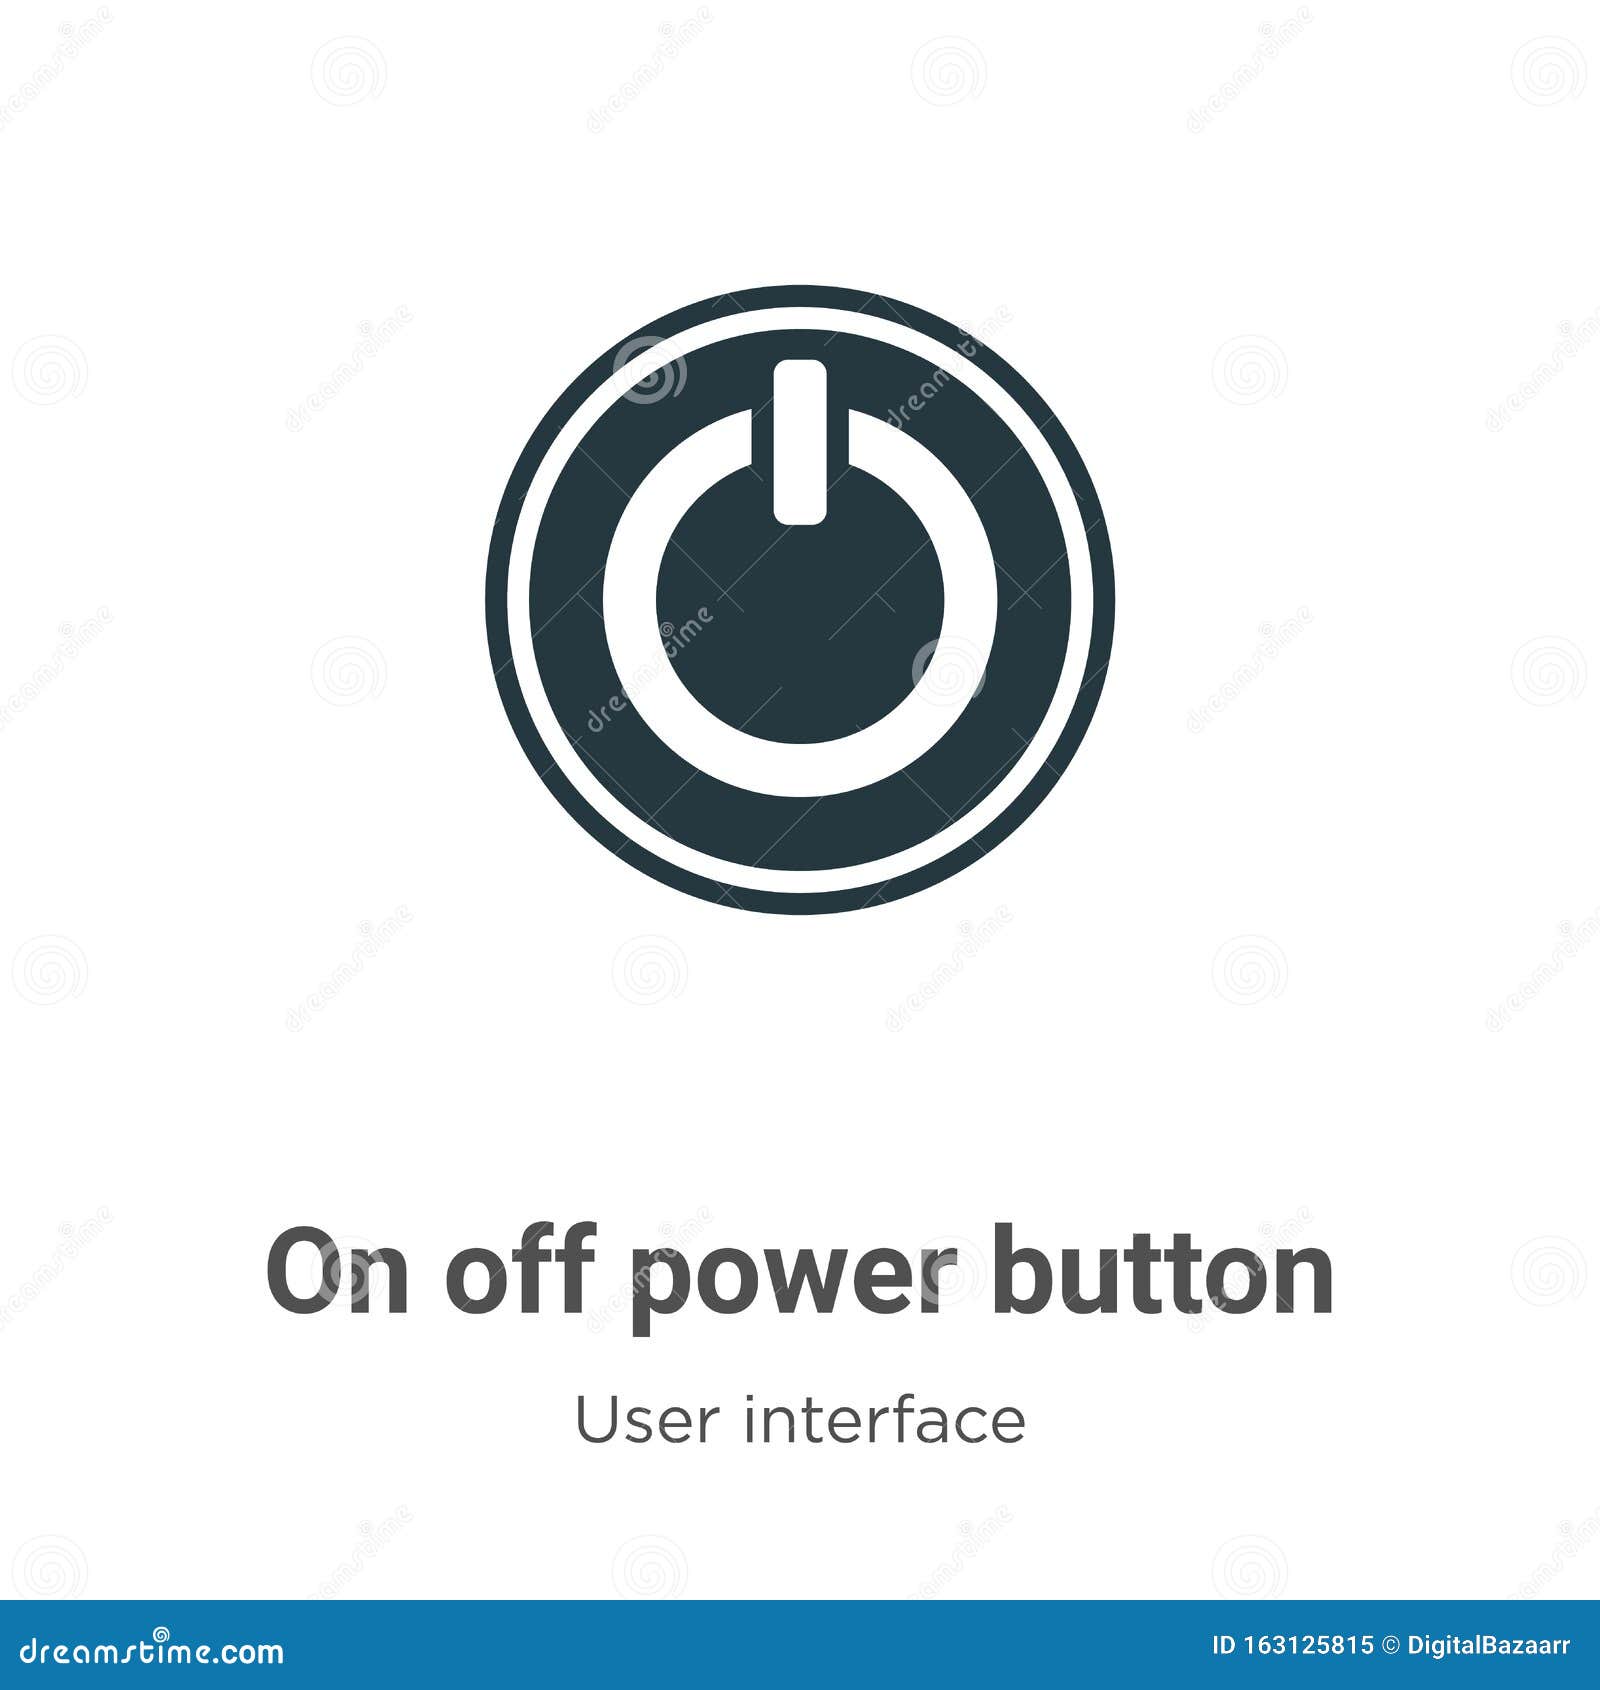 What Is a Power Button and What Are the On/Off Symbols?